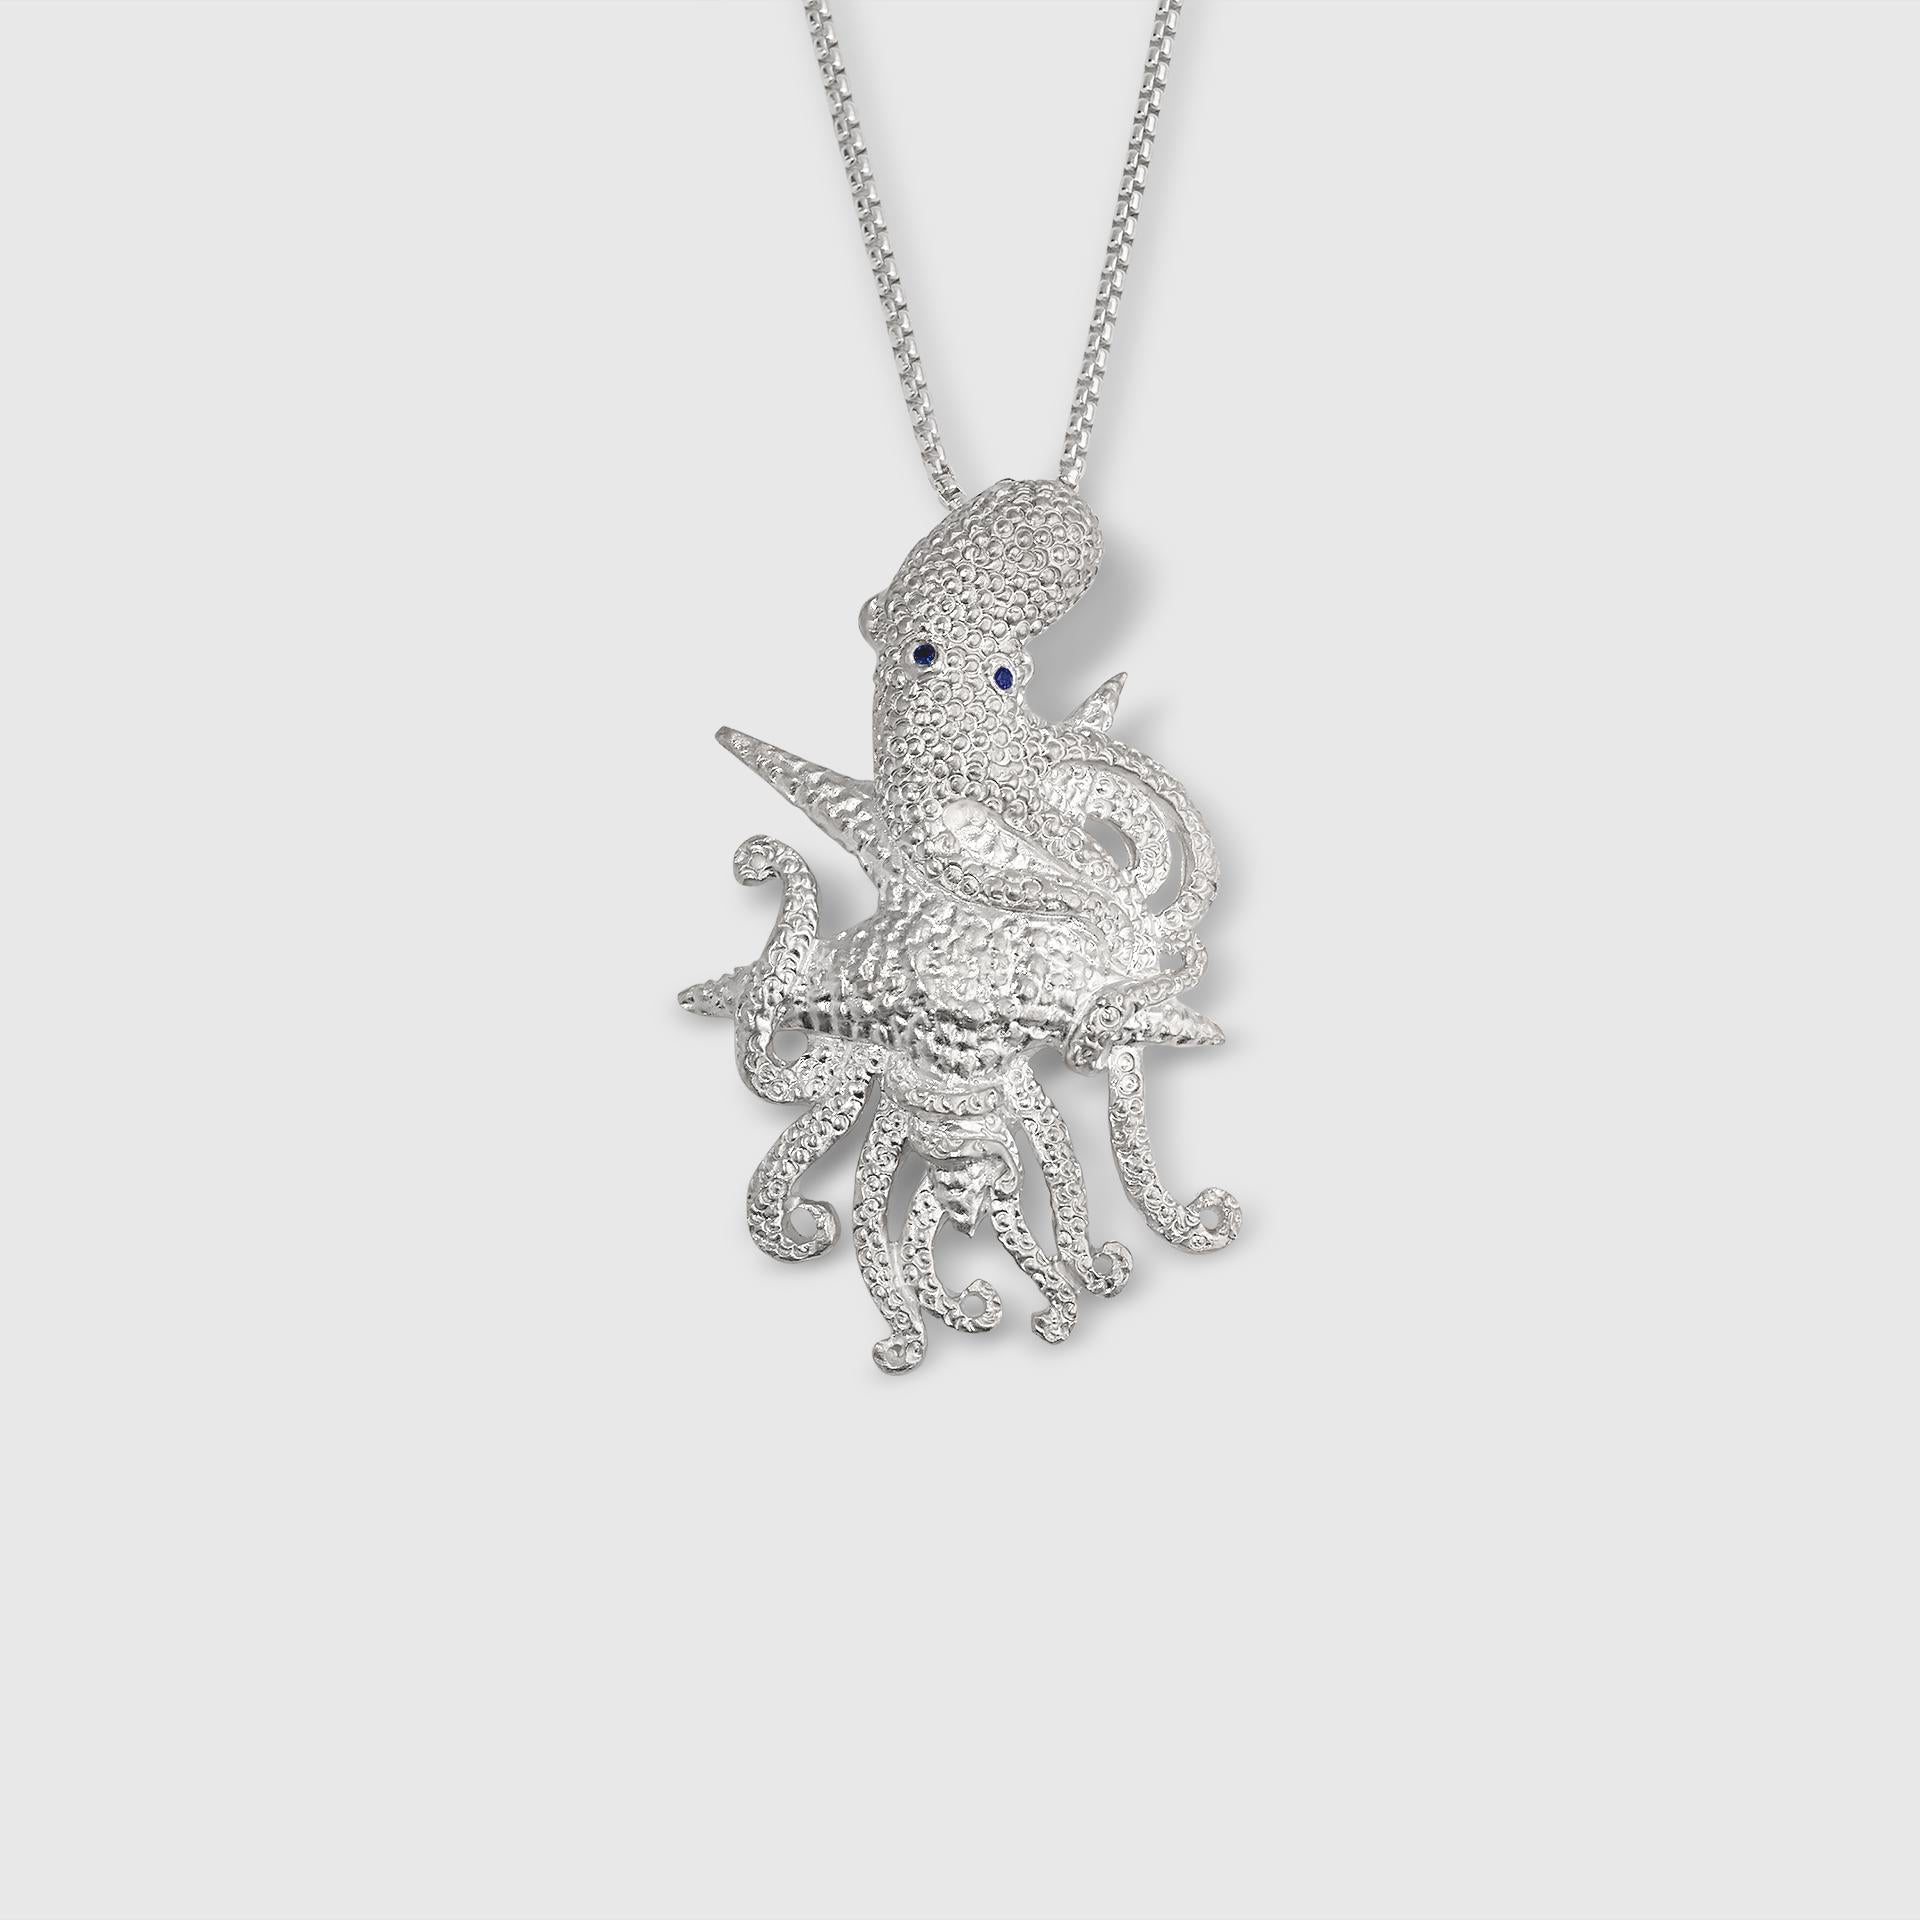 Large, Stunning Sterling Silver Detailed Octopus Pendant Necklace w/ Round, Bright Blue Sapphire Eyes by Ashley Childs

This stunning detailed octopus was originally carved by 